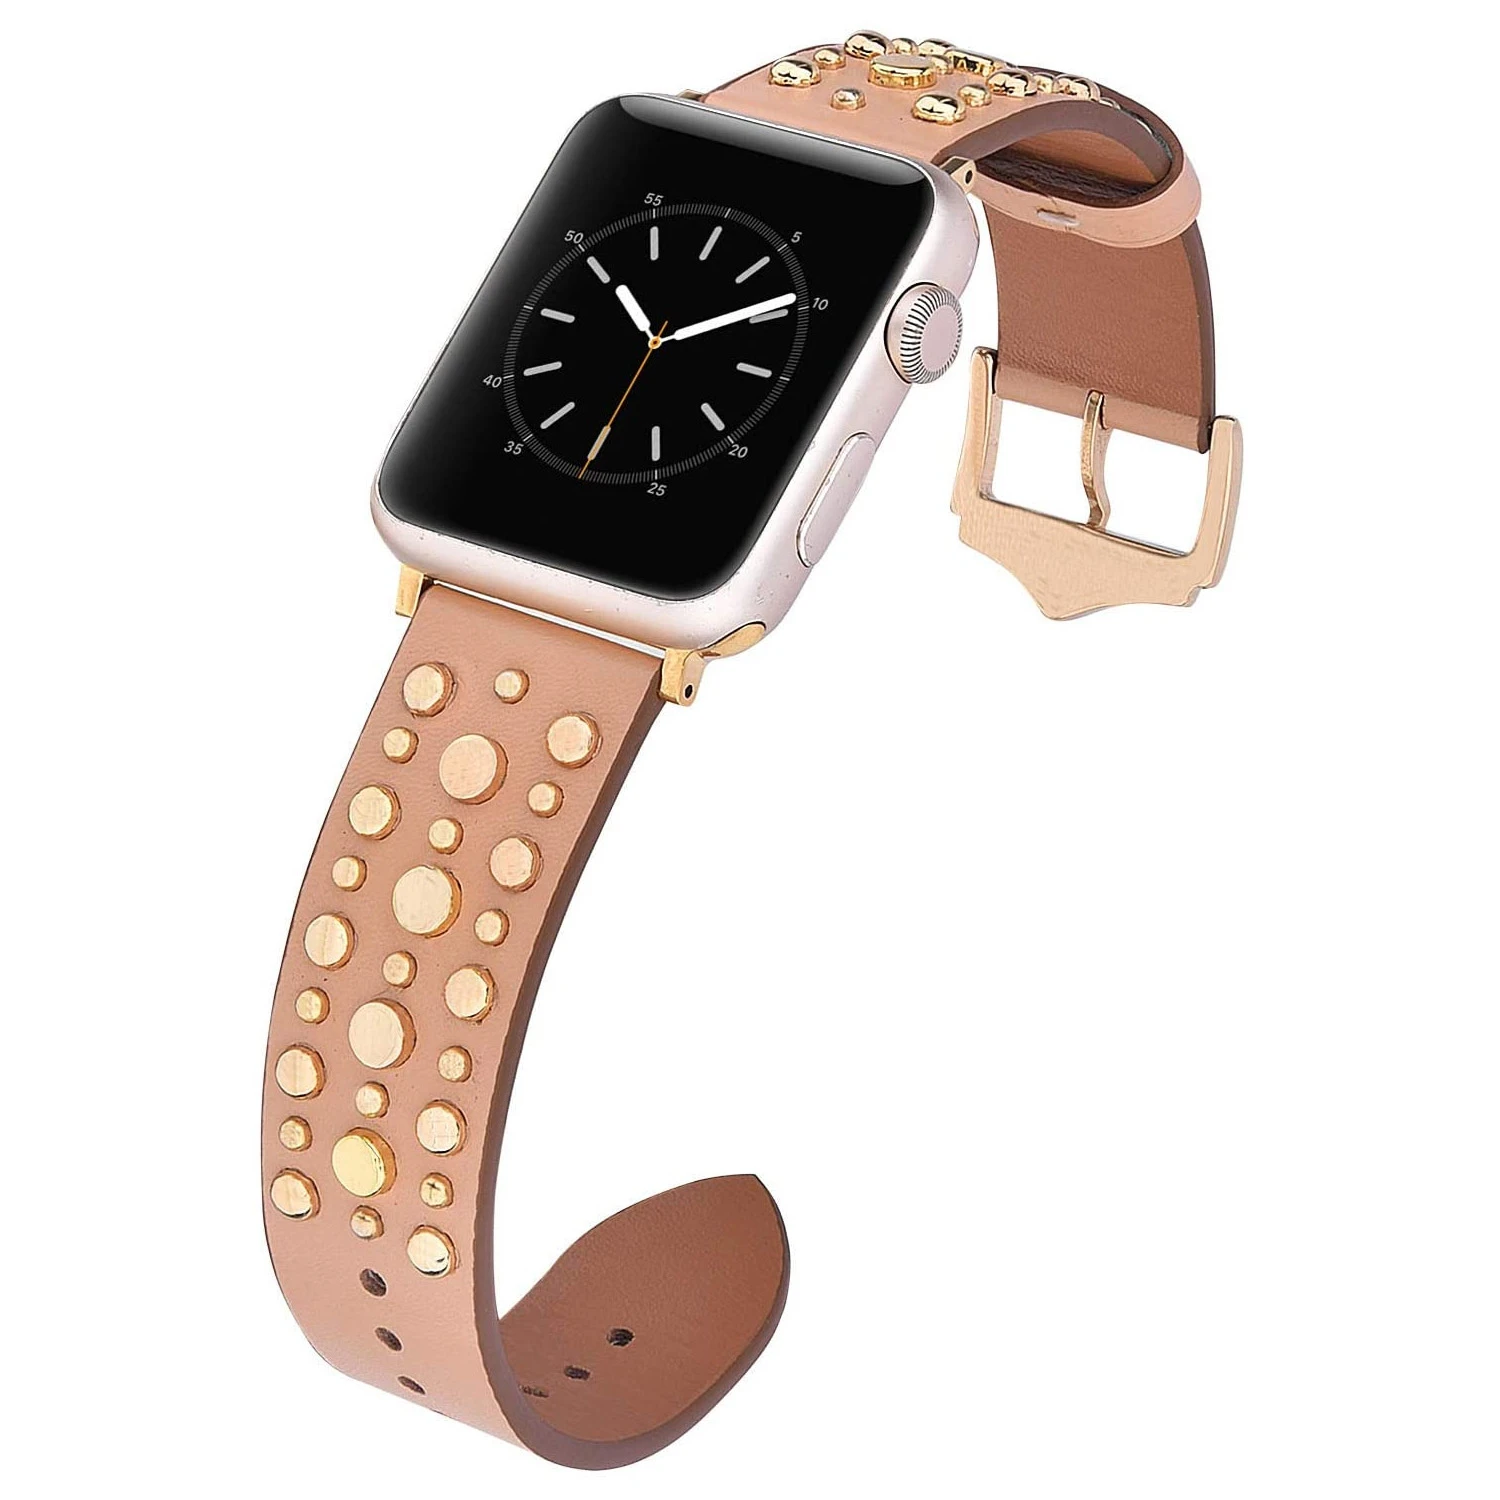 Leather watchband for apple watch band 44mm 42mm 40mm 38mm iWatch Series 5 4 3 2 1 Bracelet Replacement Strap Wrist smart watch